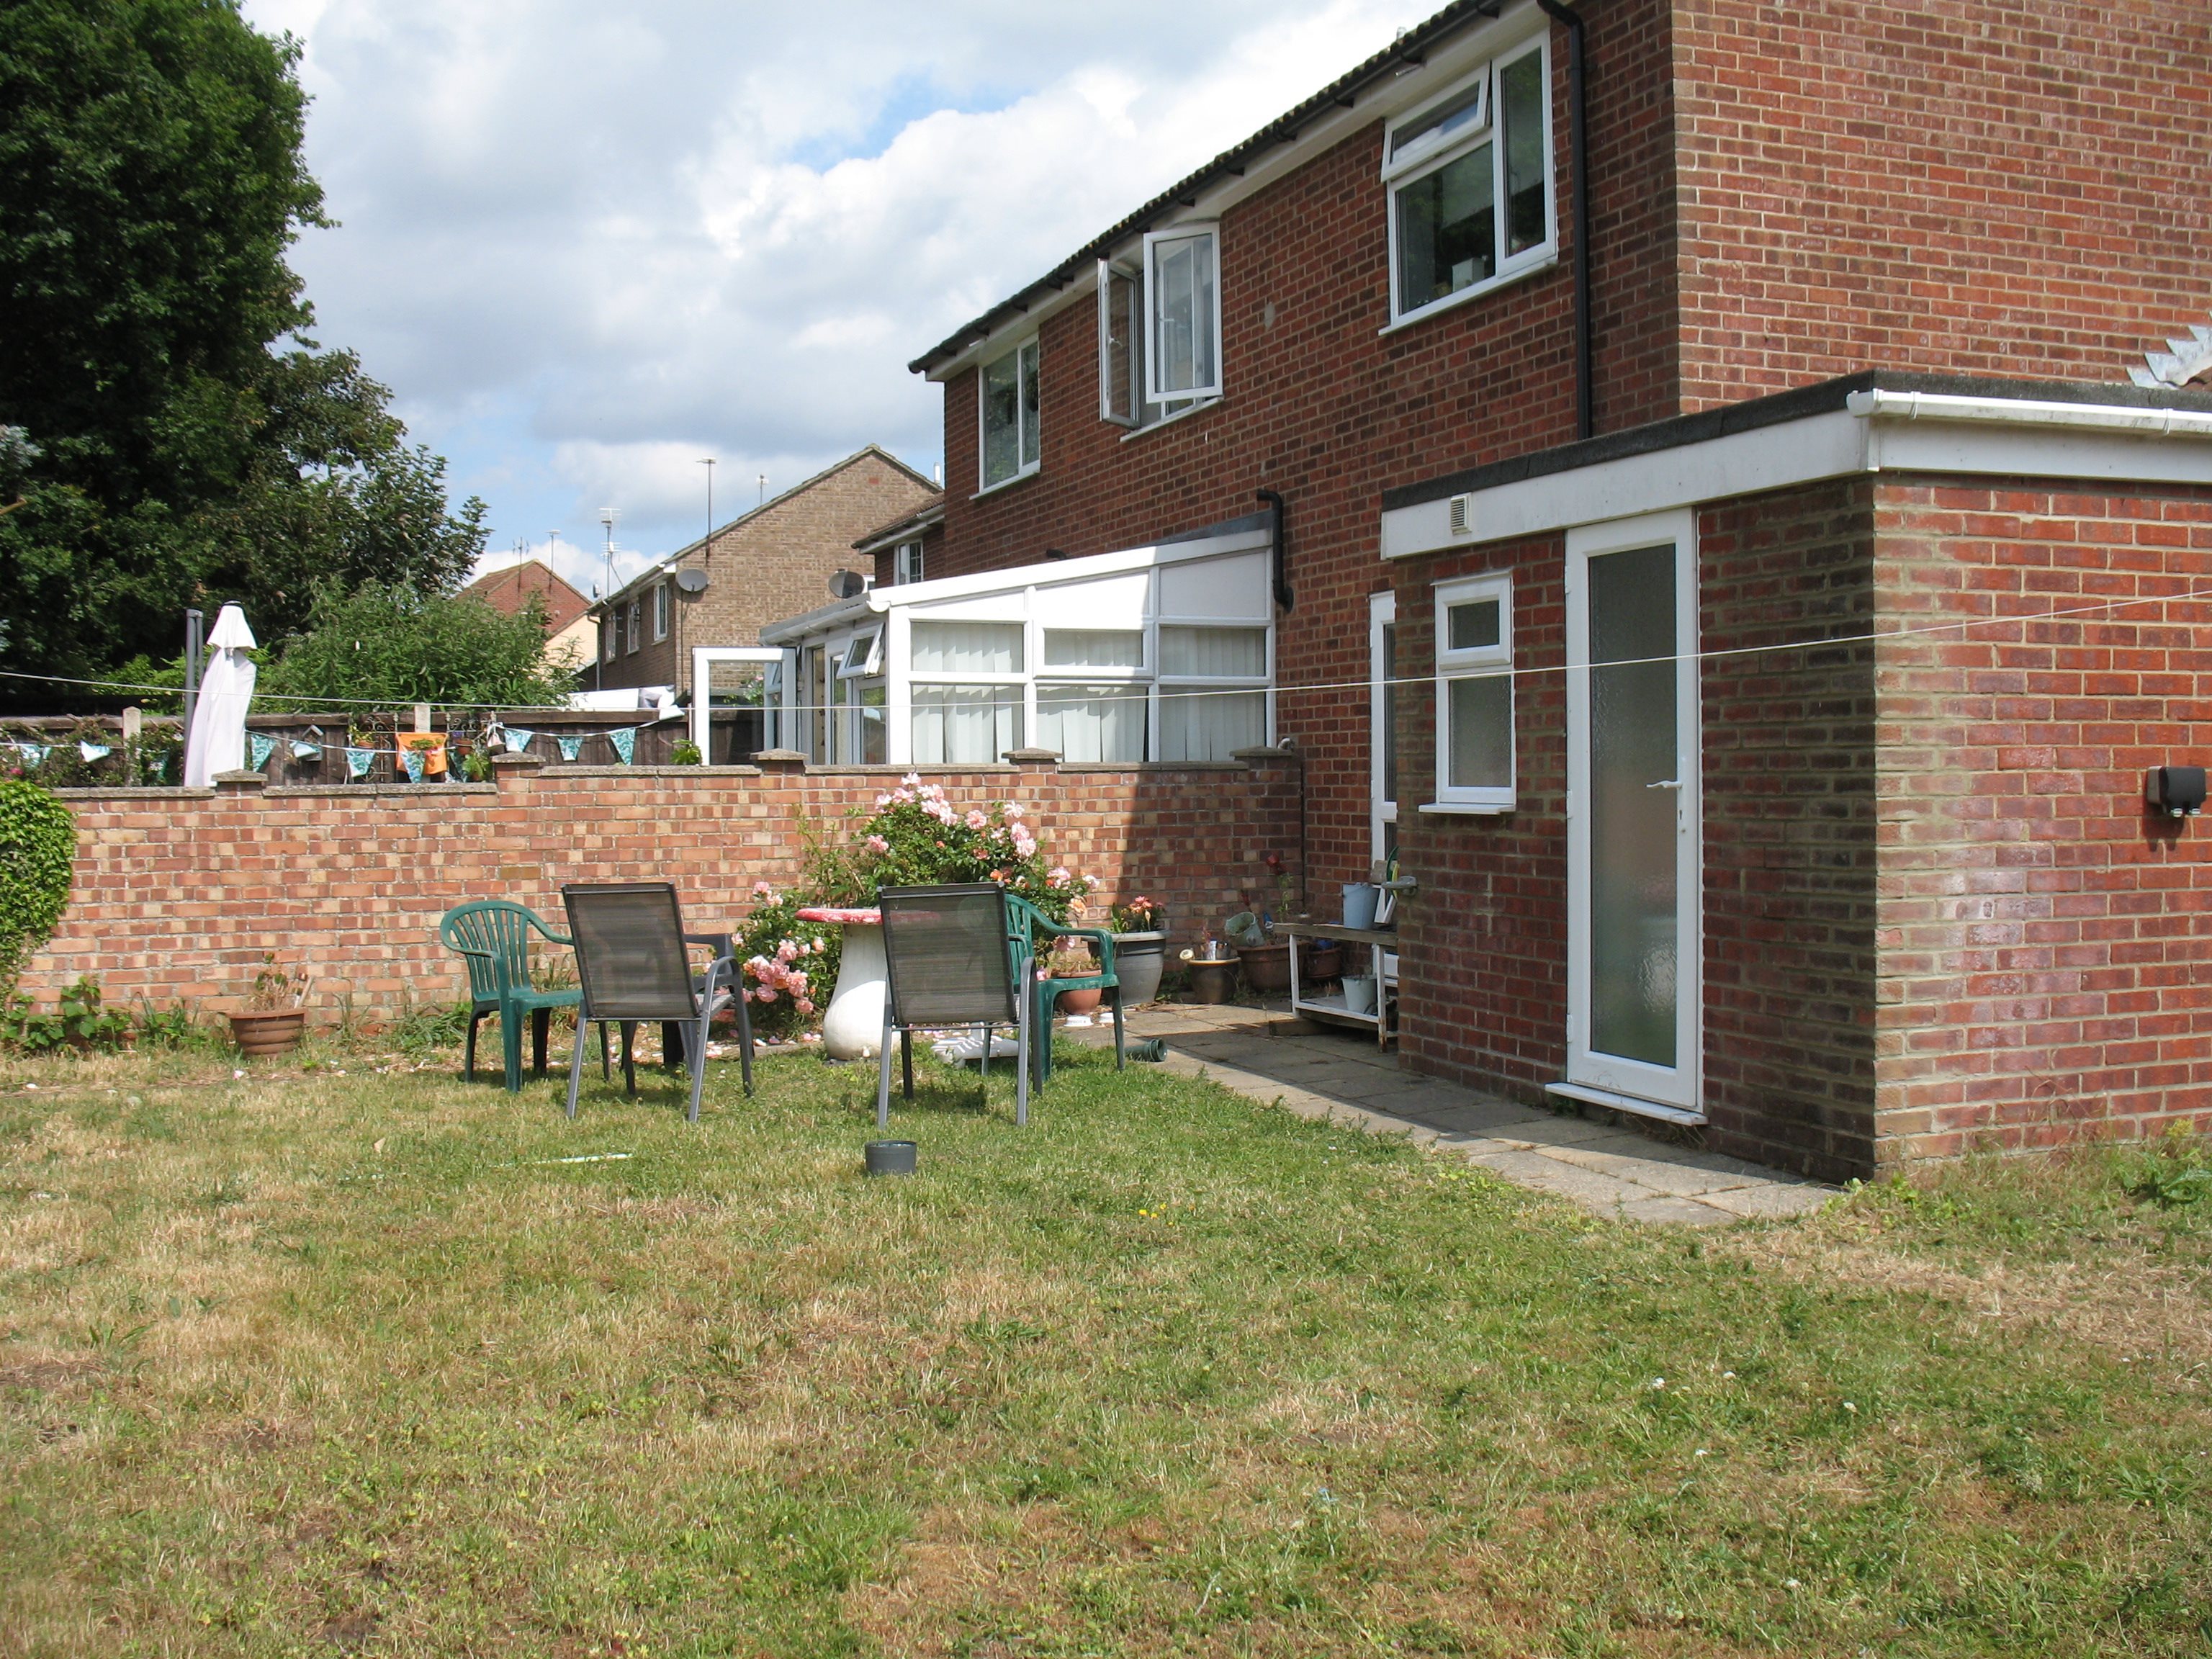 1 bed house / flat share to rent in Henrietta Close, Wivenhoe  - Property Image 1